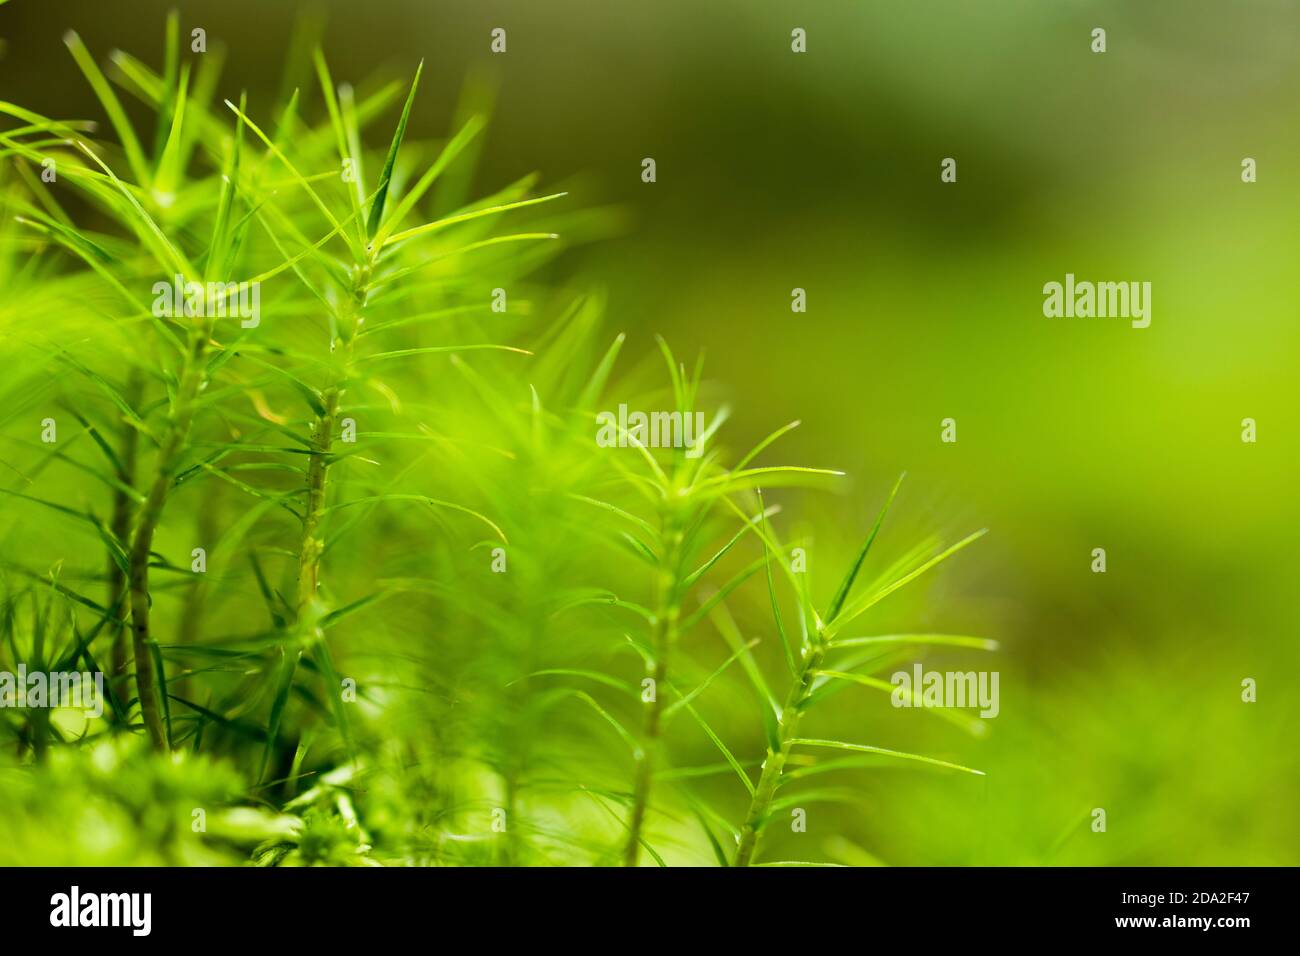 abstract green nature background with empty place for text Stock Photo